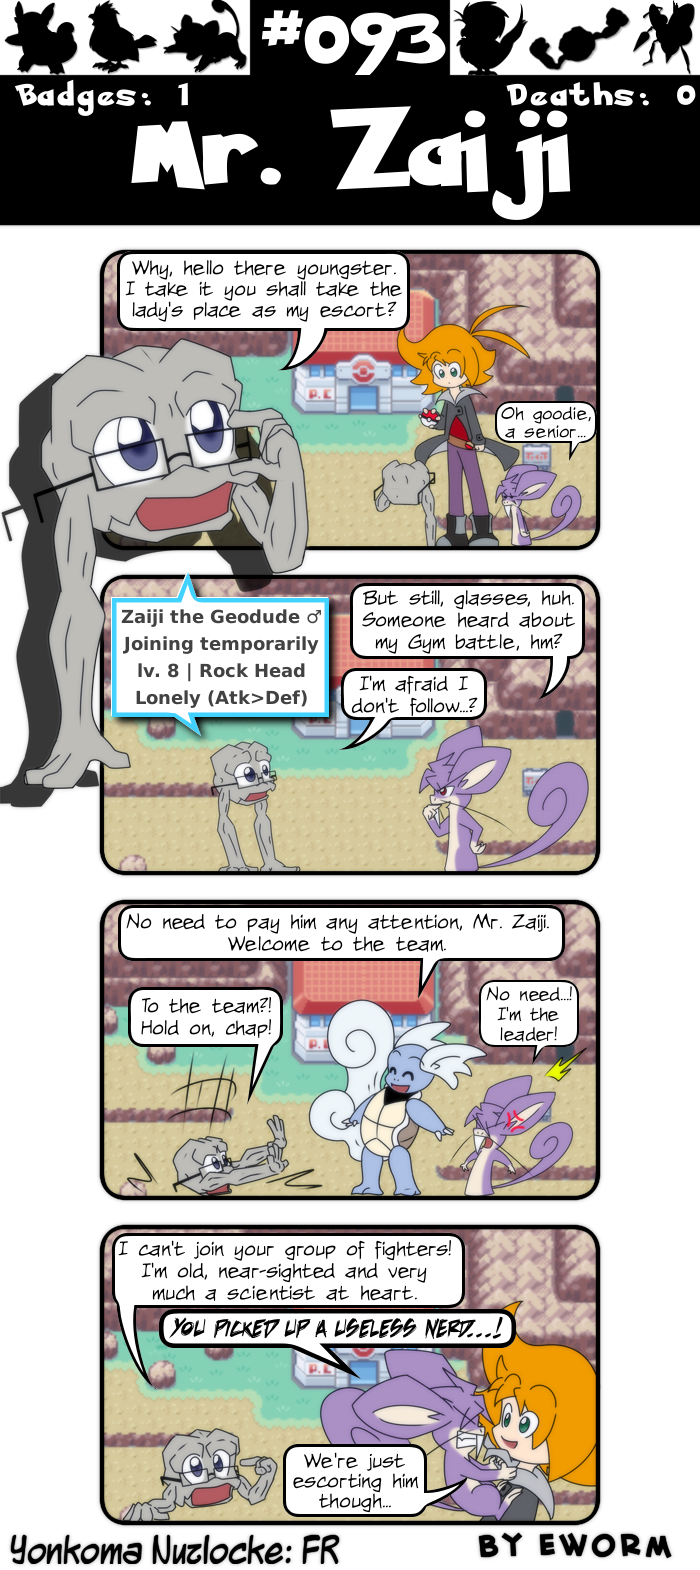 Judging by the comments under strip #053, you're now absolutely ecstatic :)
FUTURE-EDIT: When I said Geodude fans don't exist, quite a few trainers (Nuzlockers in particular) were quick to defend the mon.